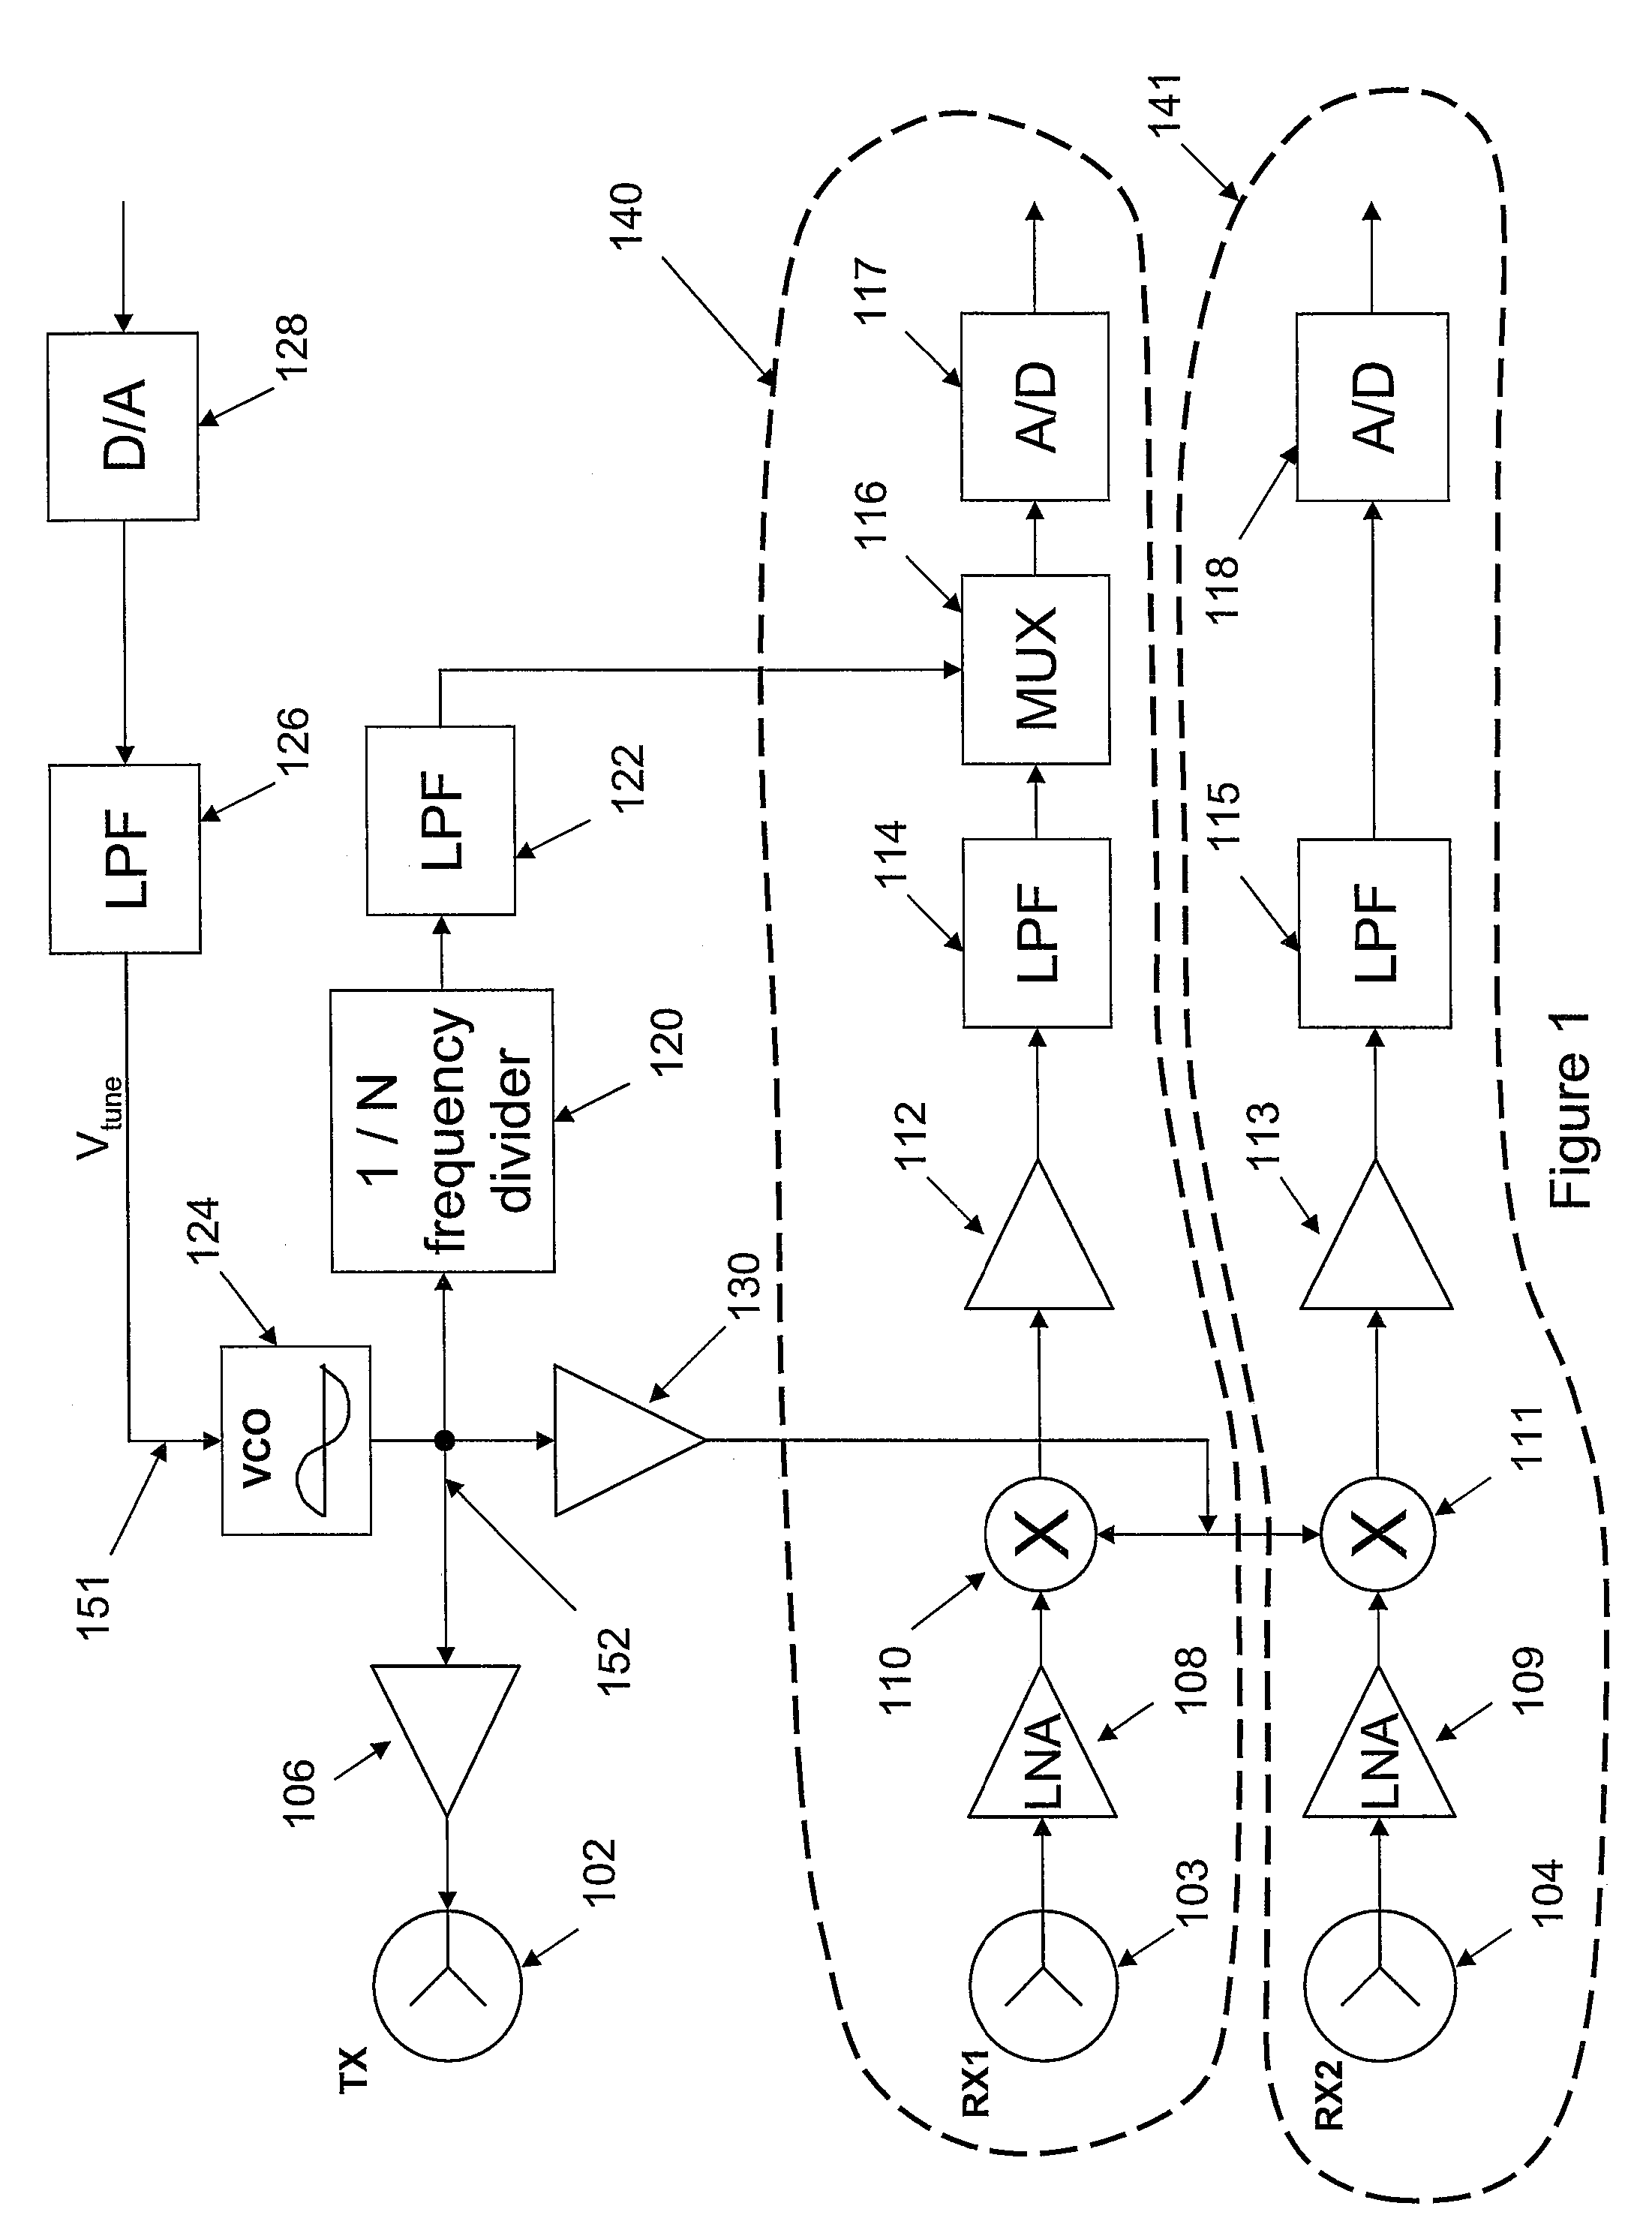 Ramp Linearization for FMCW Radar Using Digital Down-Conversion of a Sampled VCO Signal